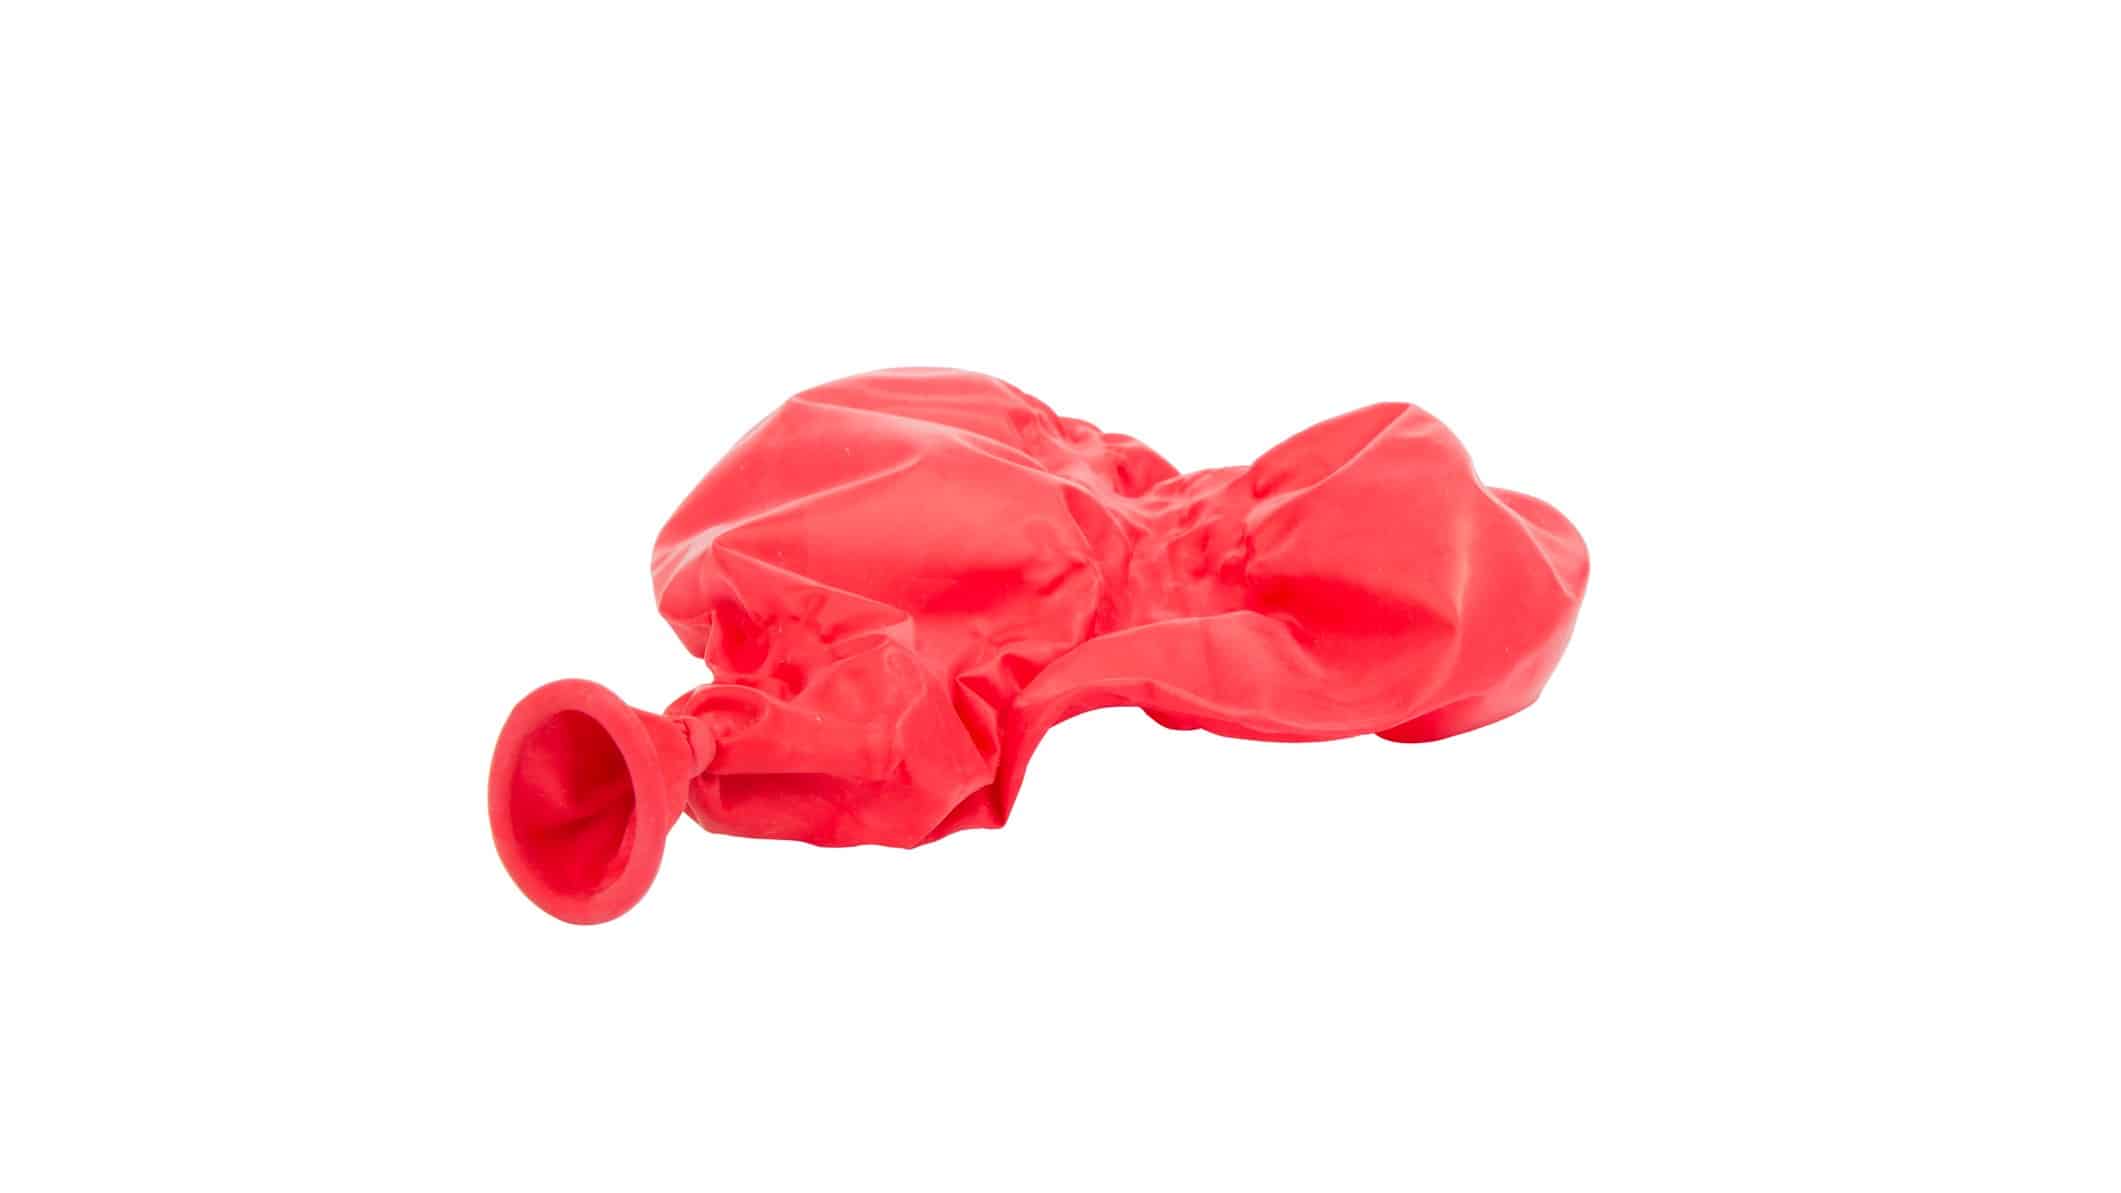 Zip share price a deflated red balloon